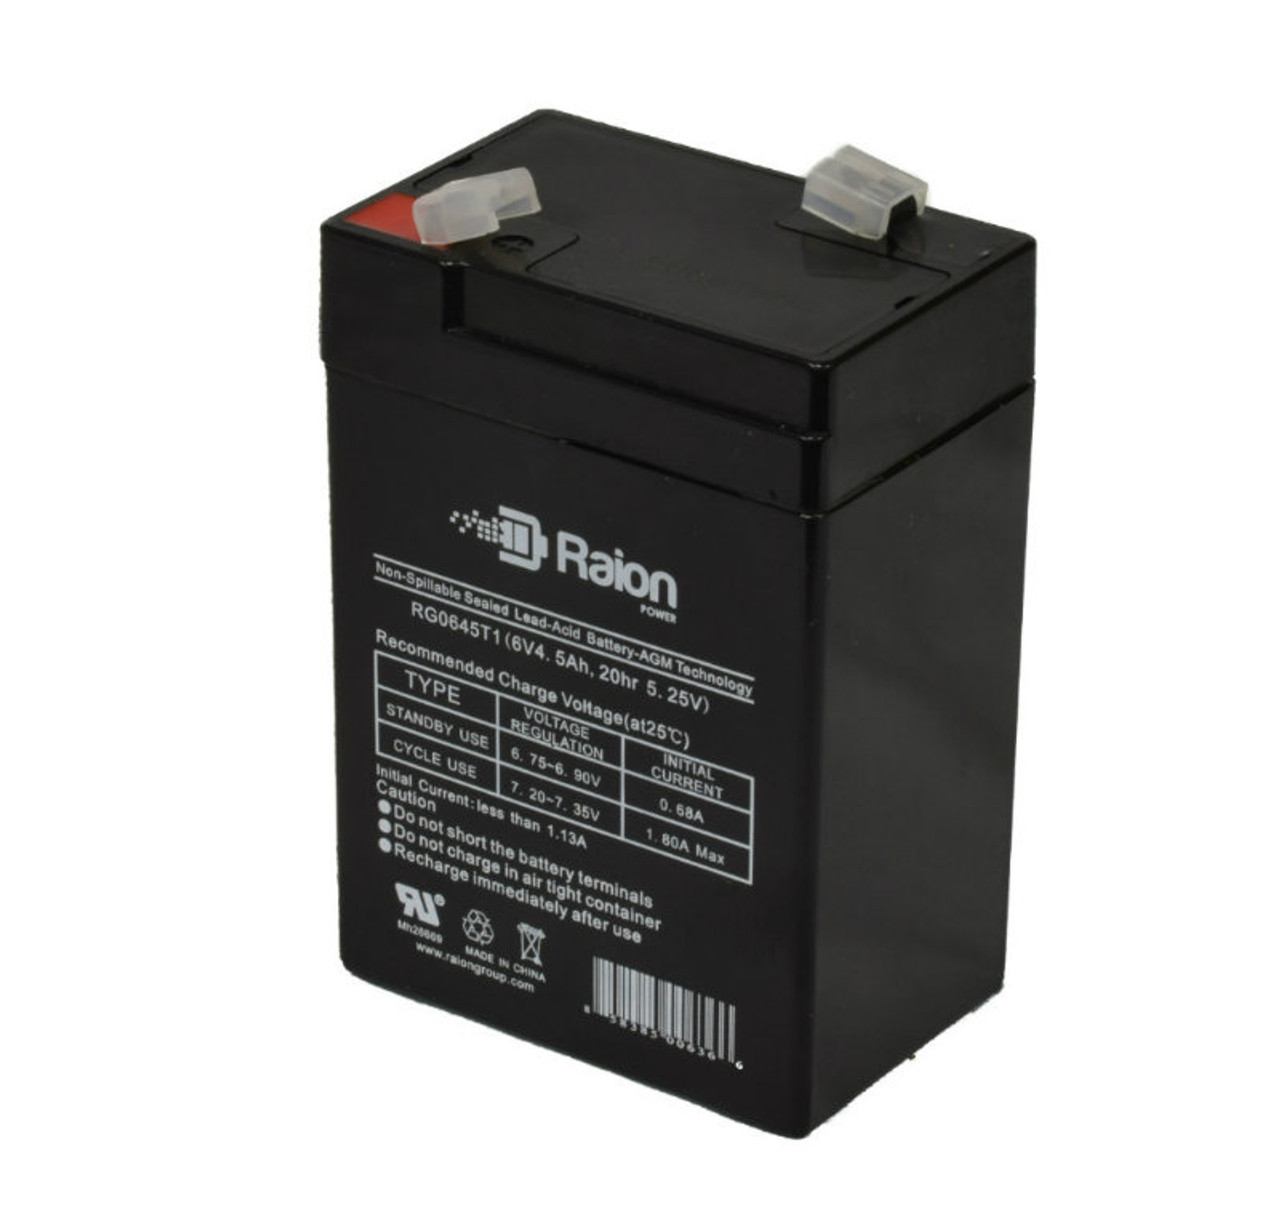 Raion Power RG0645T1 6V 4.5Ah Replacement Battery Cartridge for Weiboer GB6-4